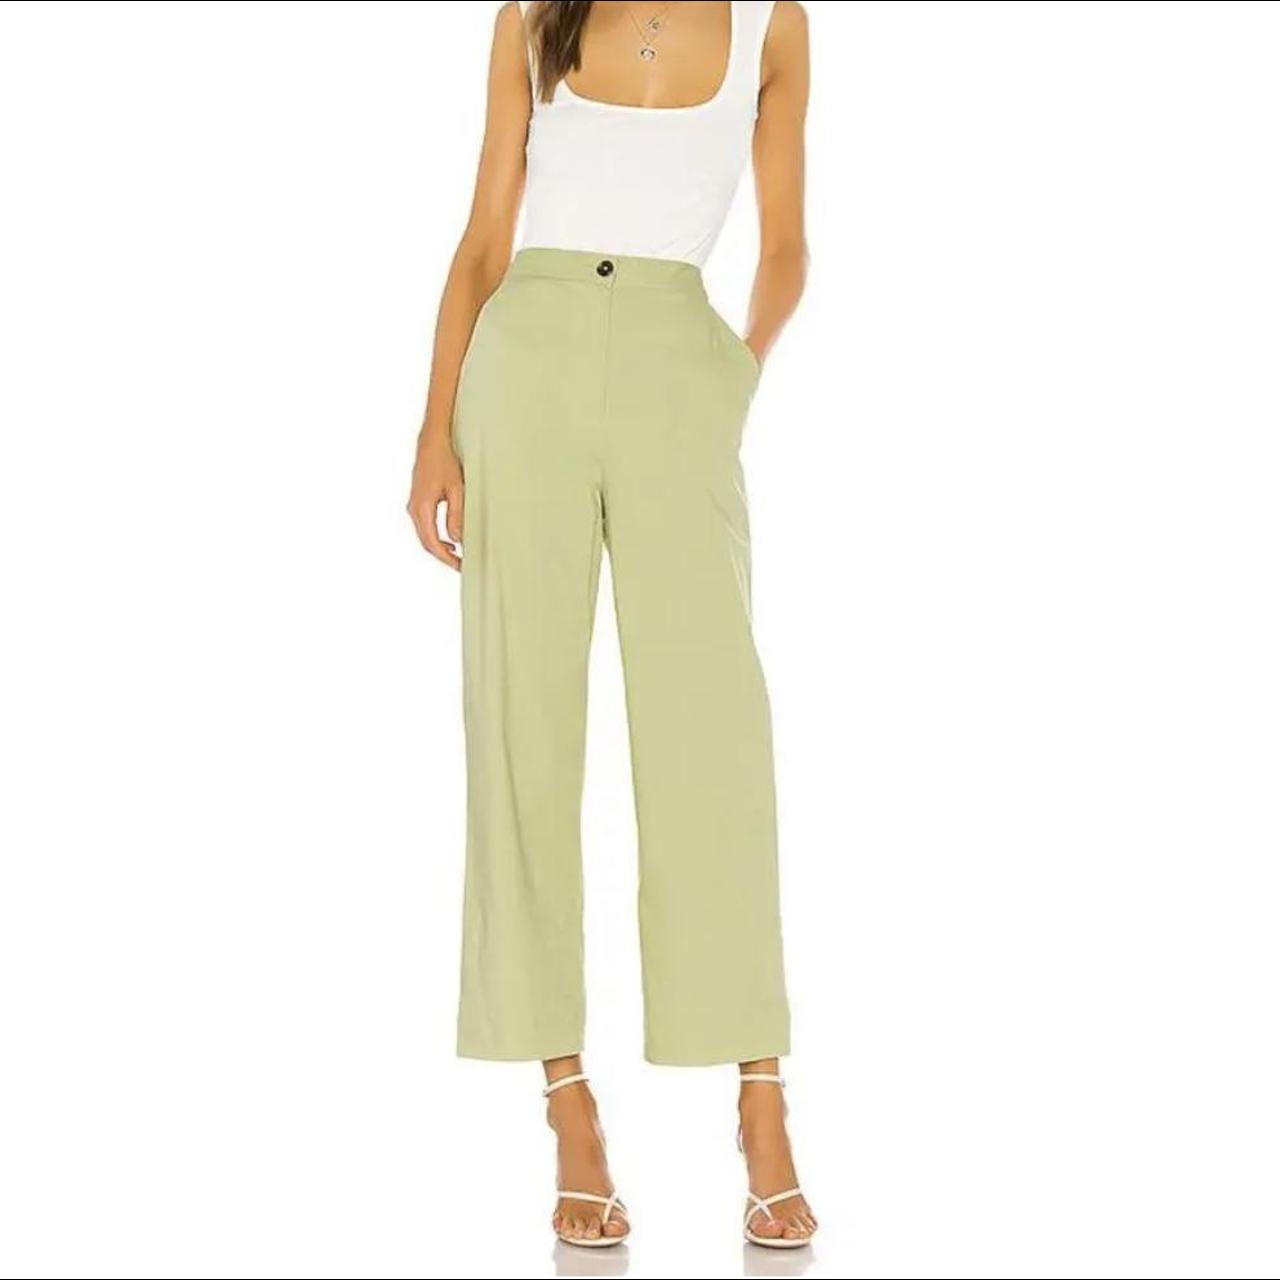 House of Harlow Women's Trousers